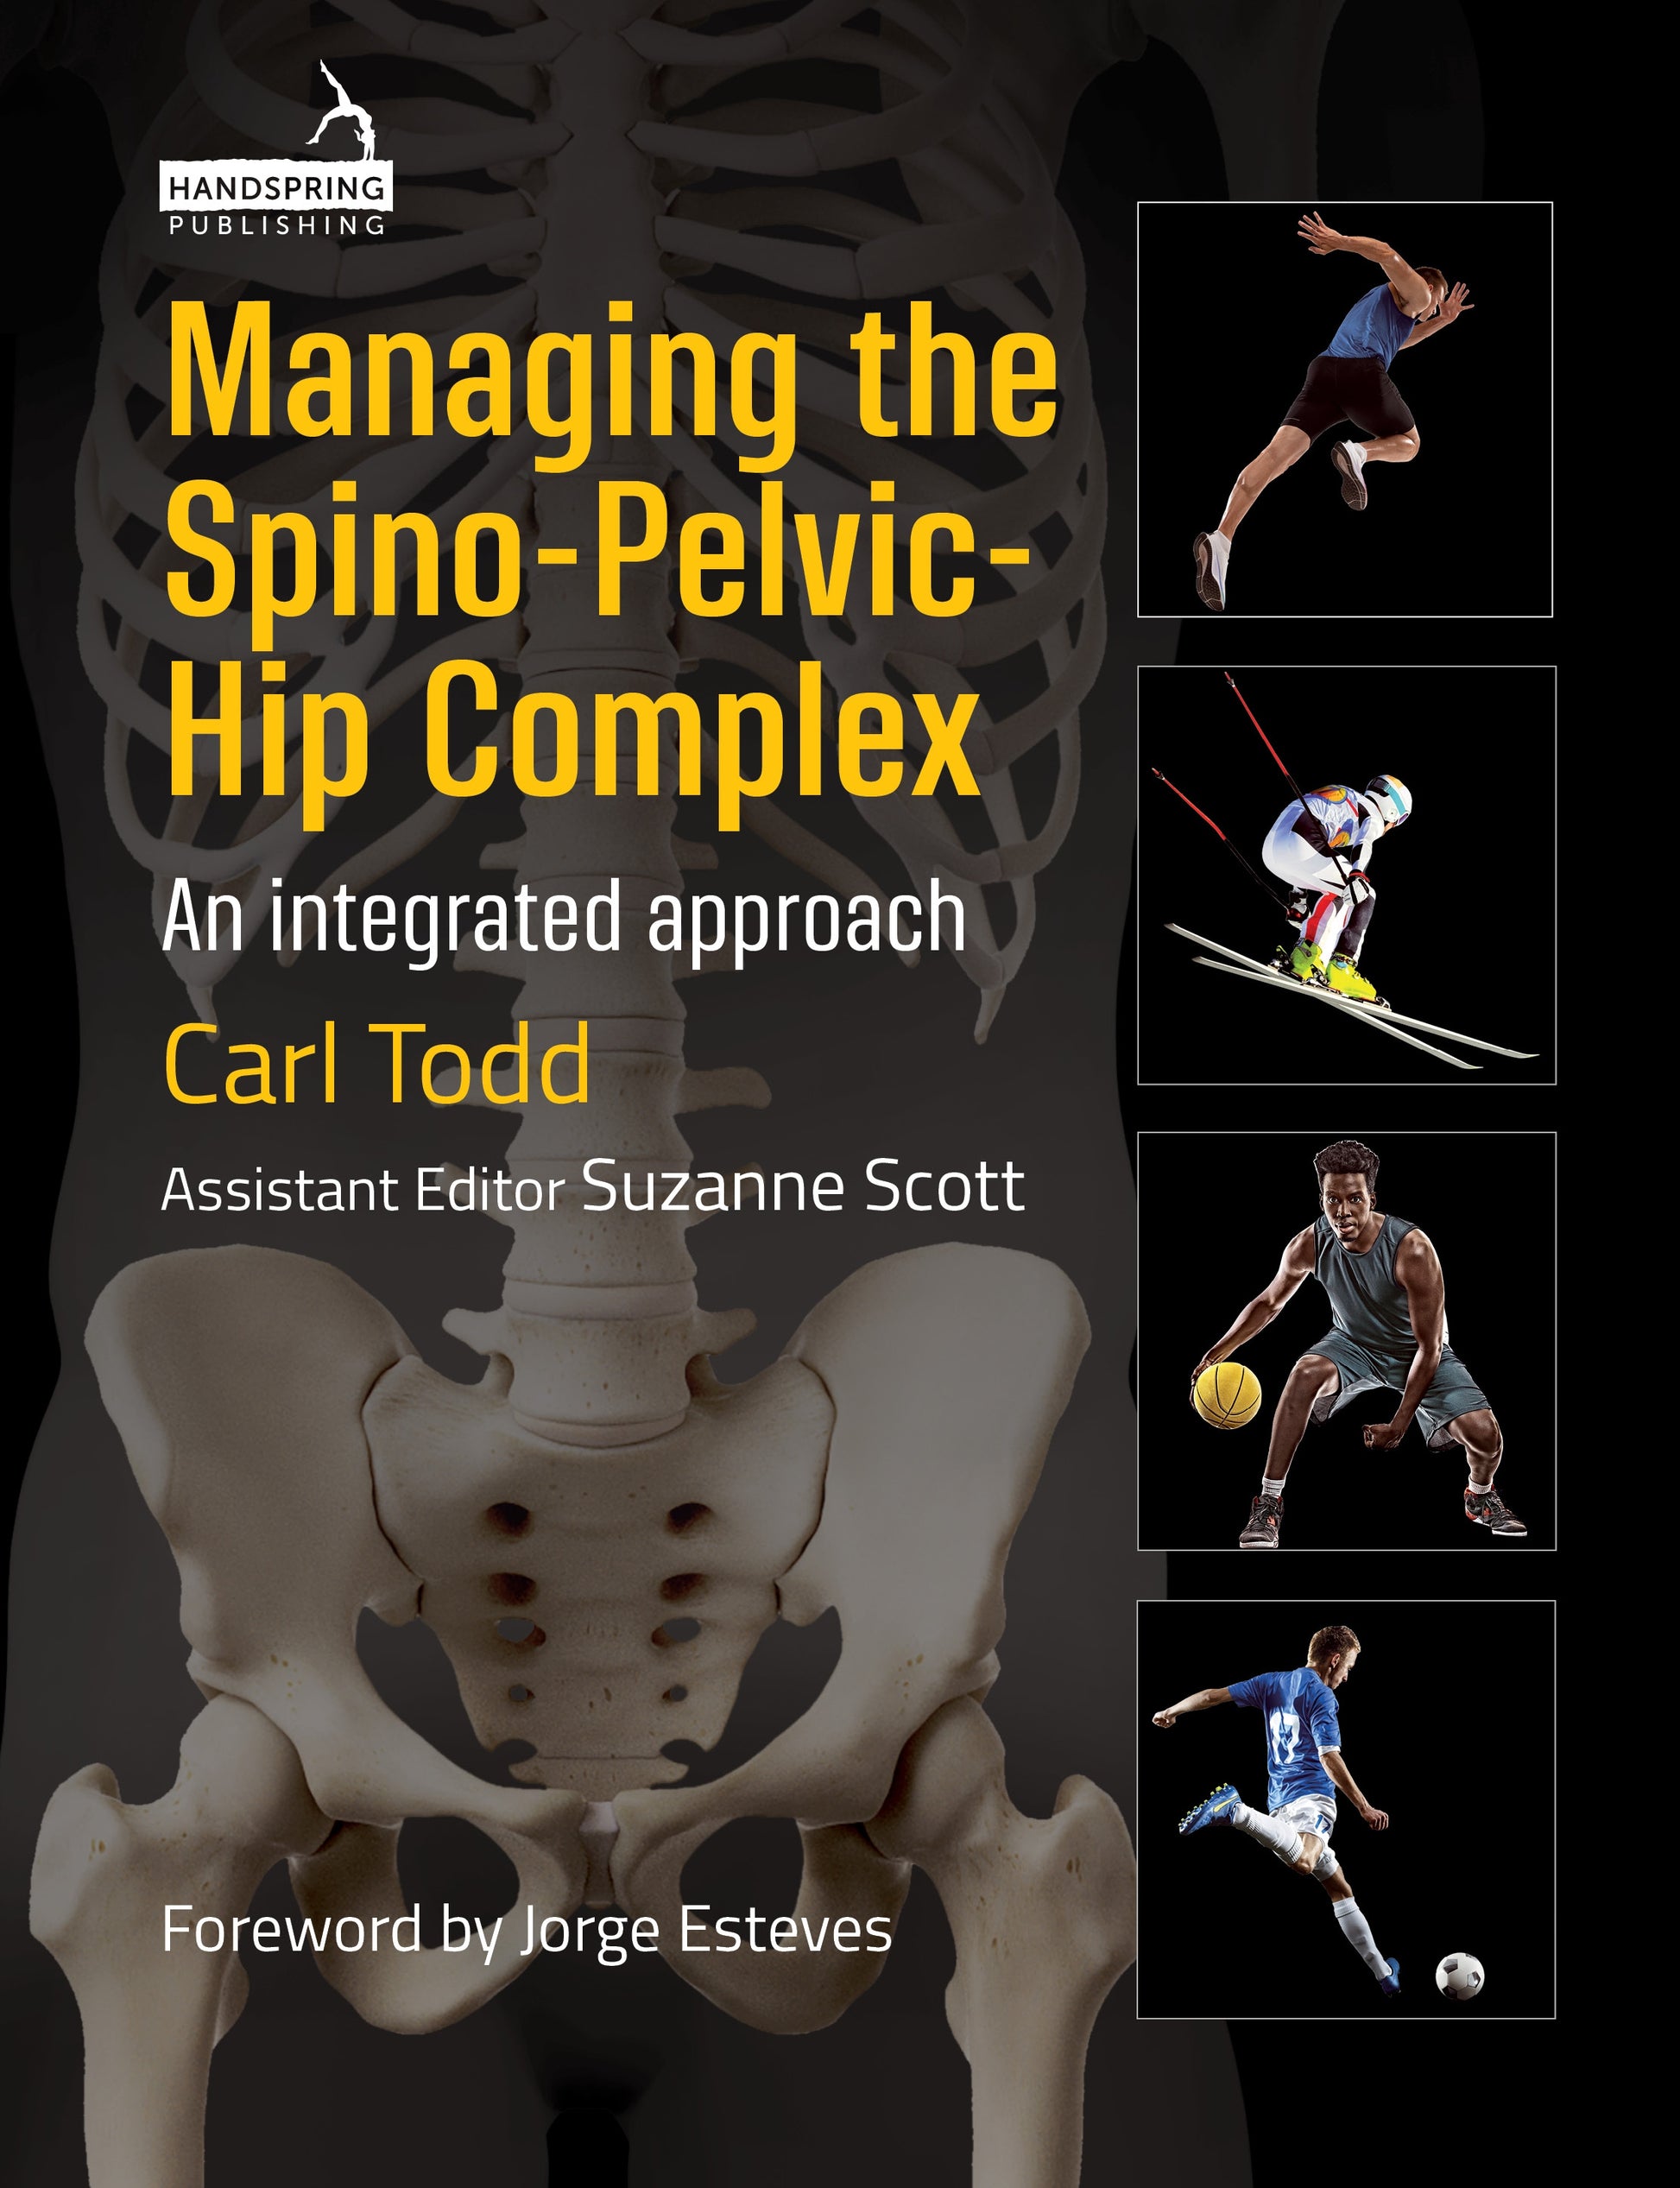 Managing the Spino-Pelvic-Hip Complex by Carl Todd